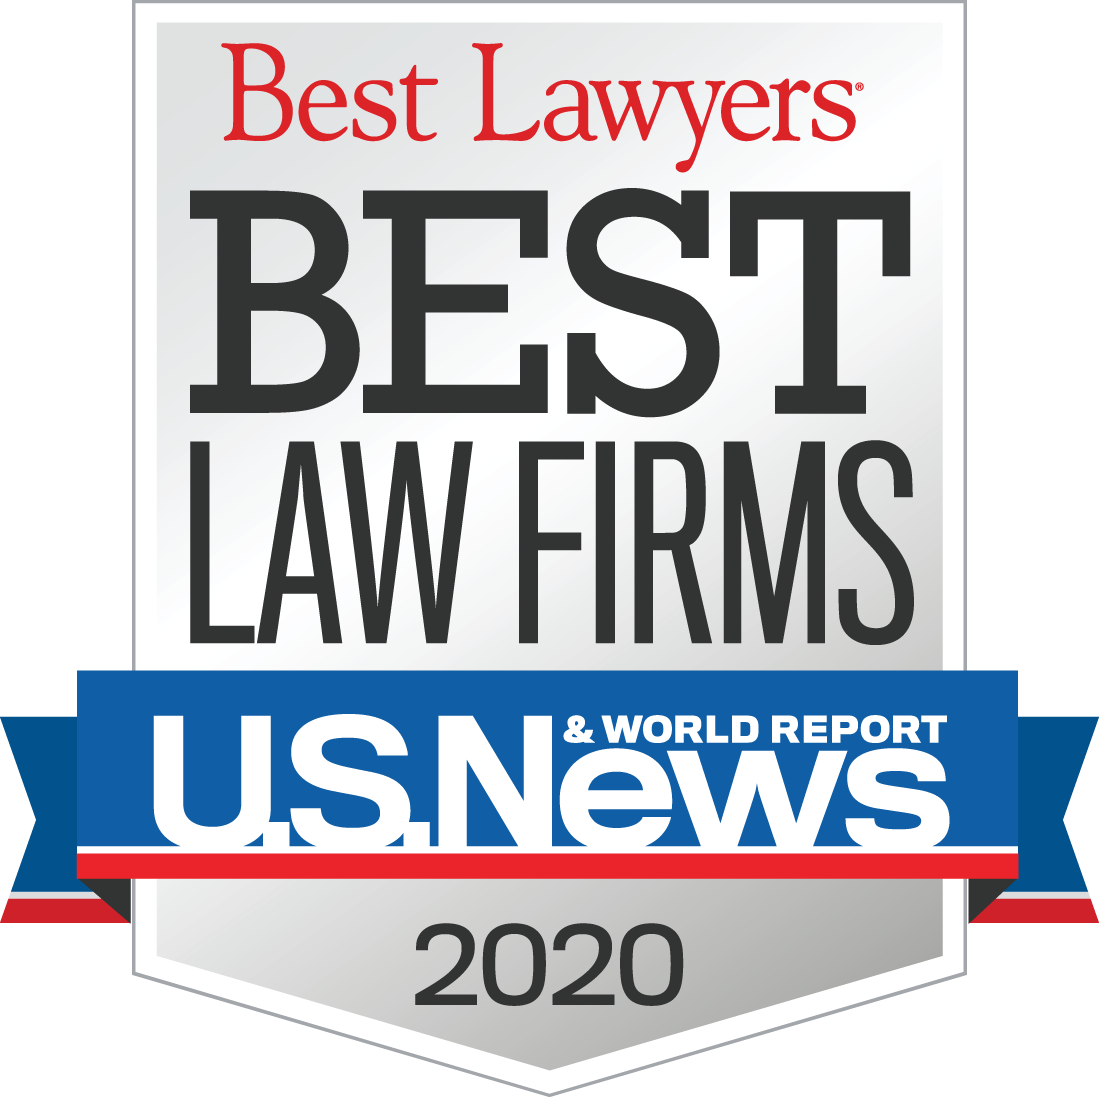 2020 US News Best Law Firms